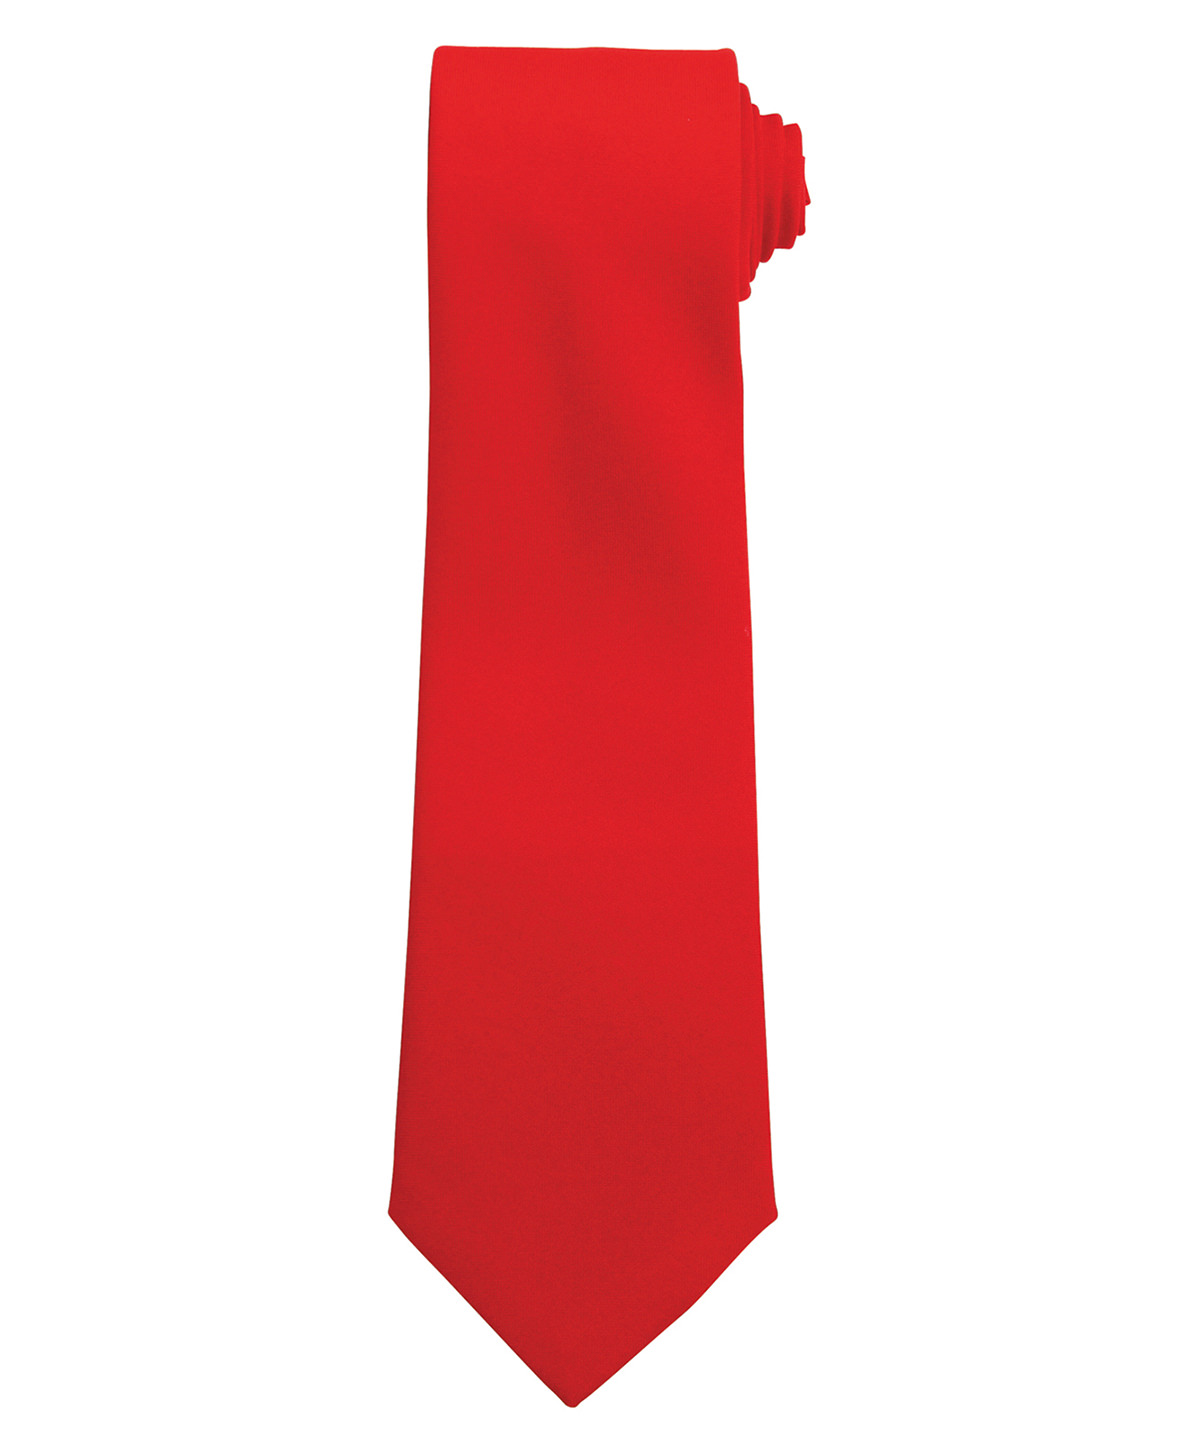 Work Tie Red Size One Size